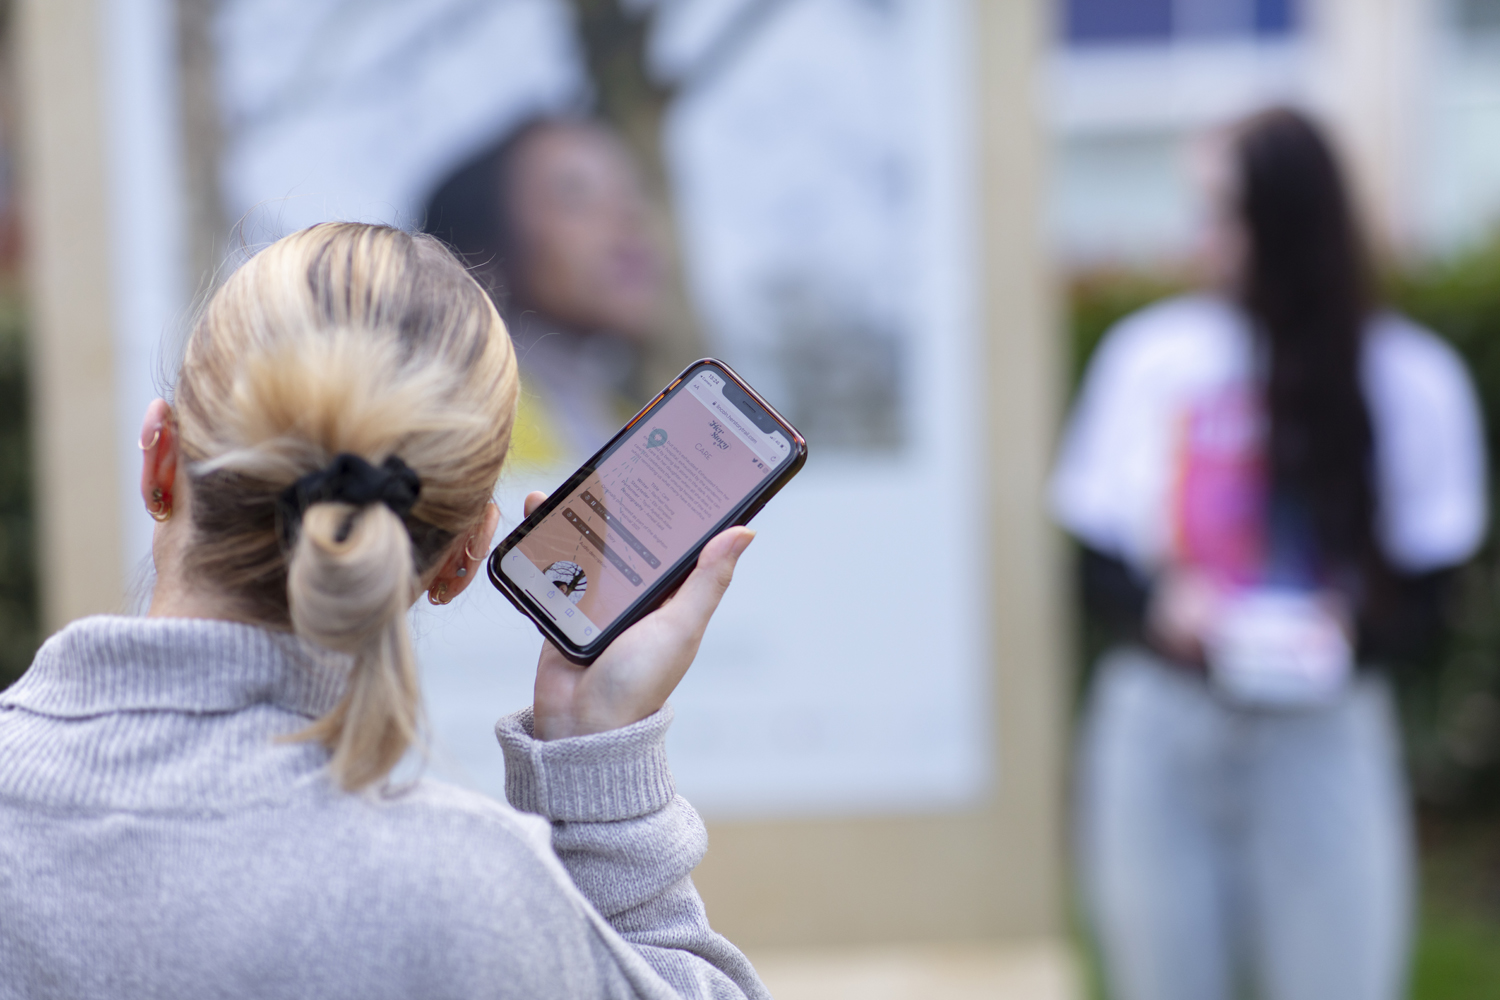 woman with blonde hair holding a phone up to ear